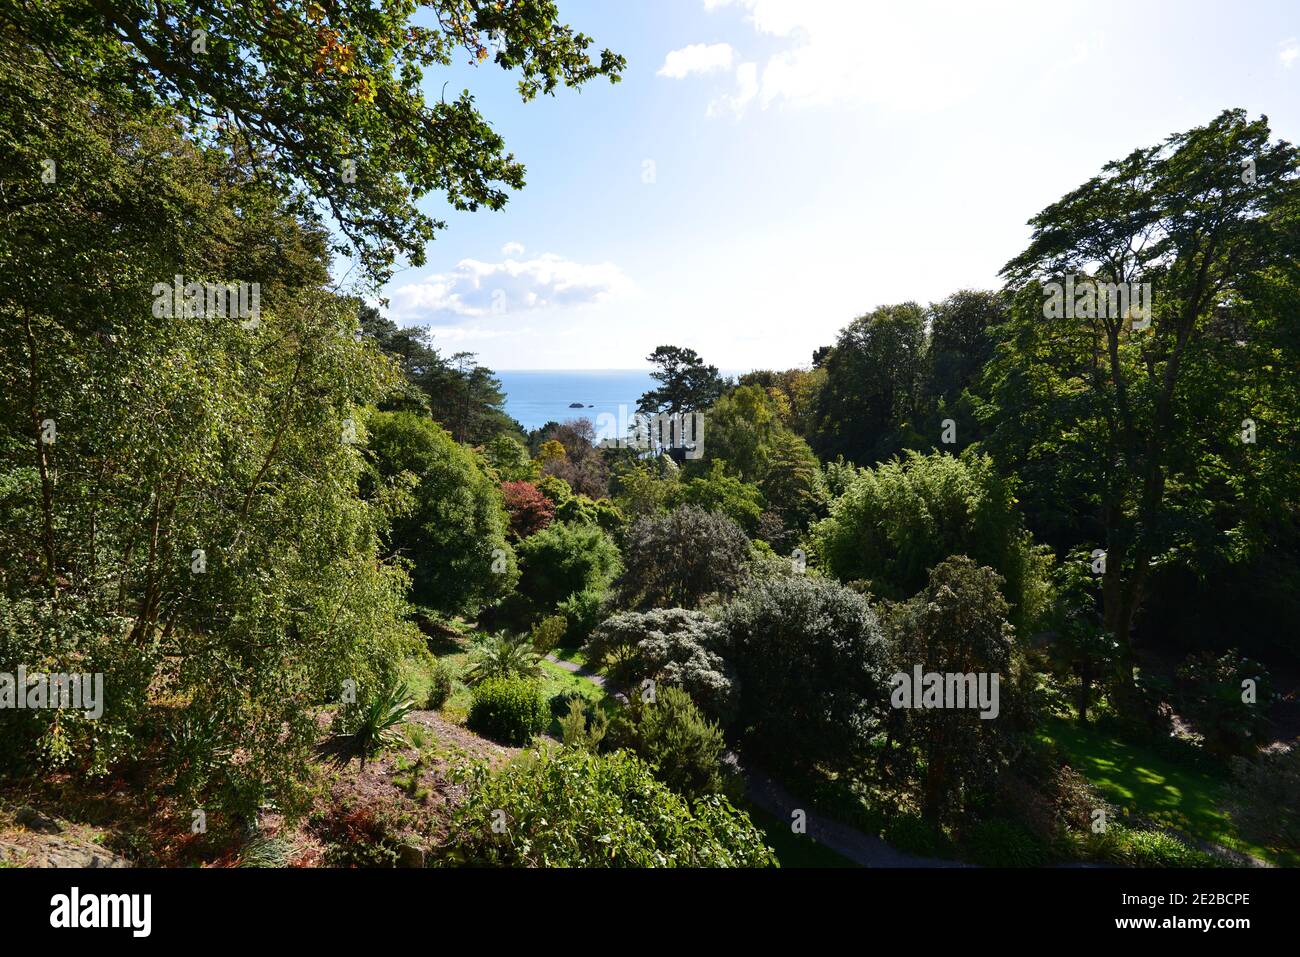 Landscape shots at Collerton Fish-Acre South Devon National Trust House and Gardens Stock Photo